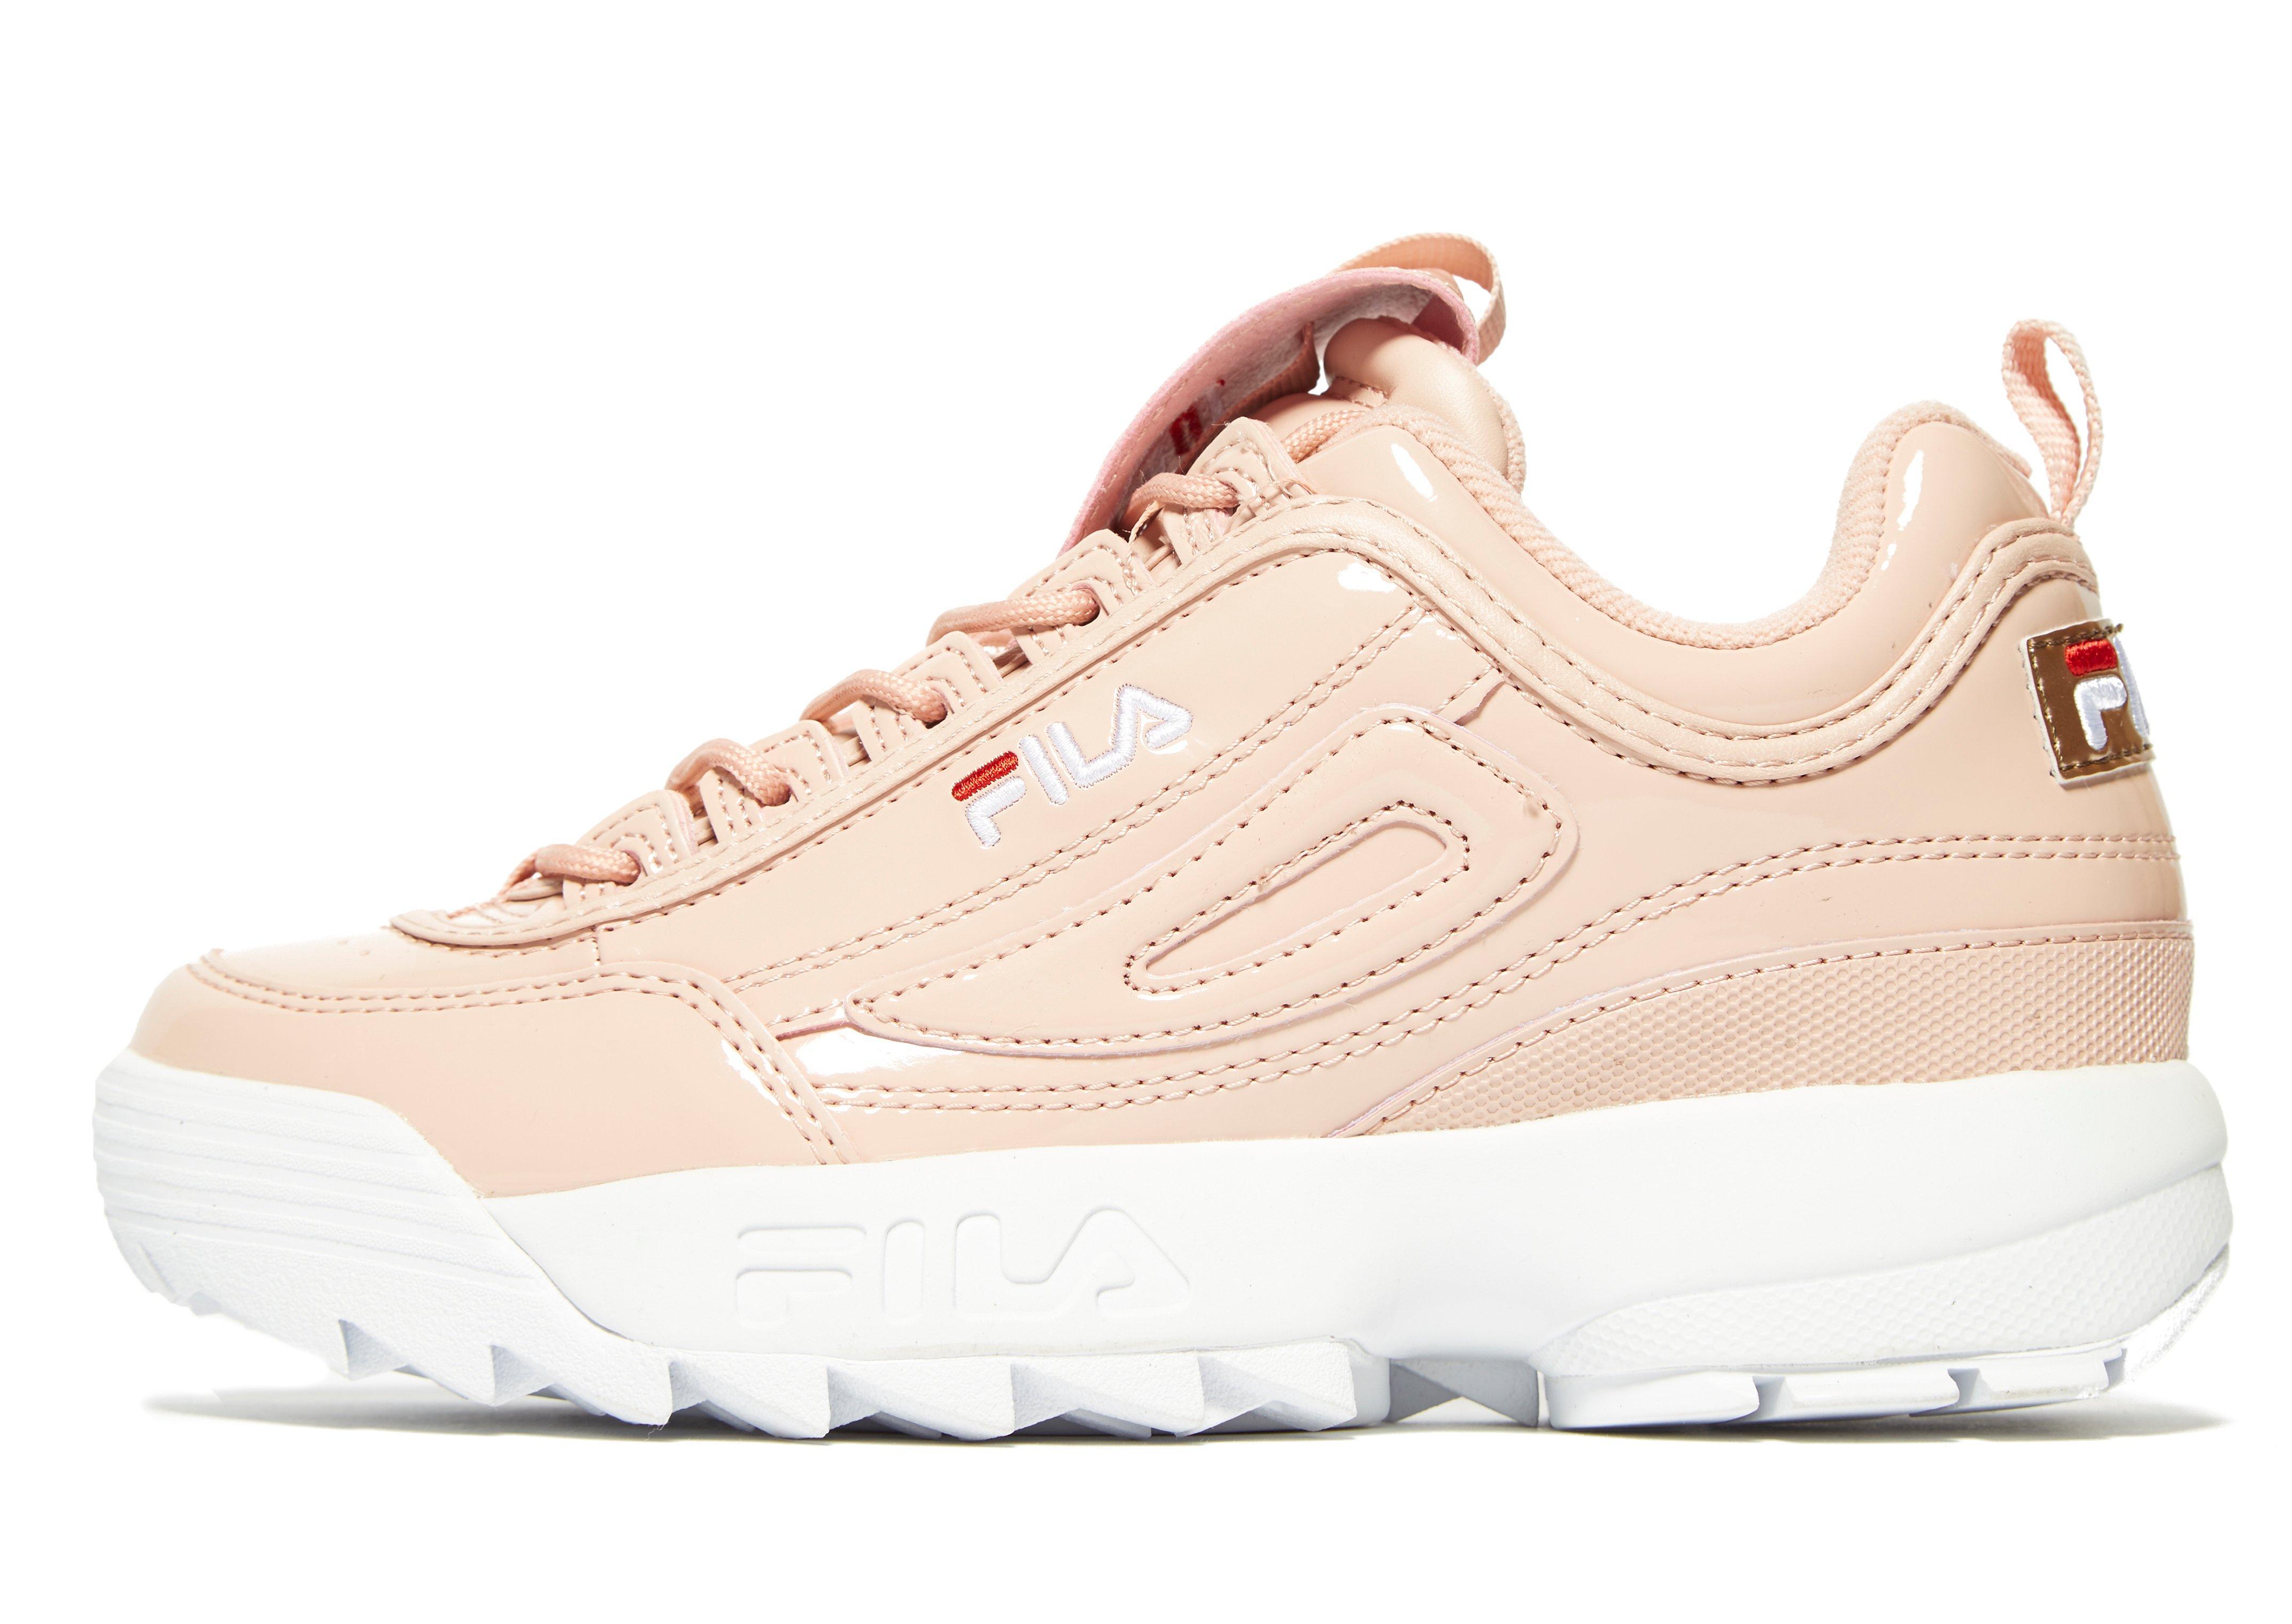 Fila Leather Disruptor Ii in Pink/White (Pink) - Lyst